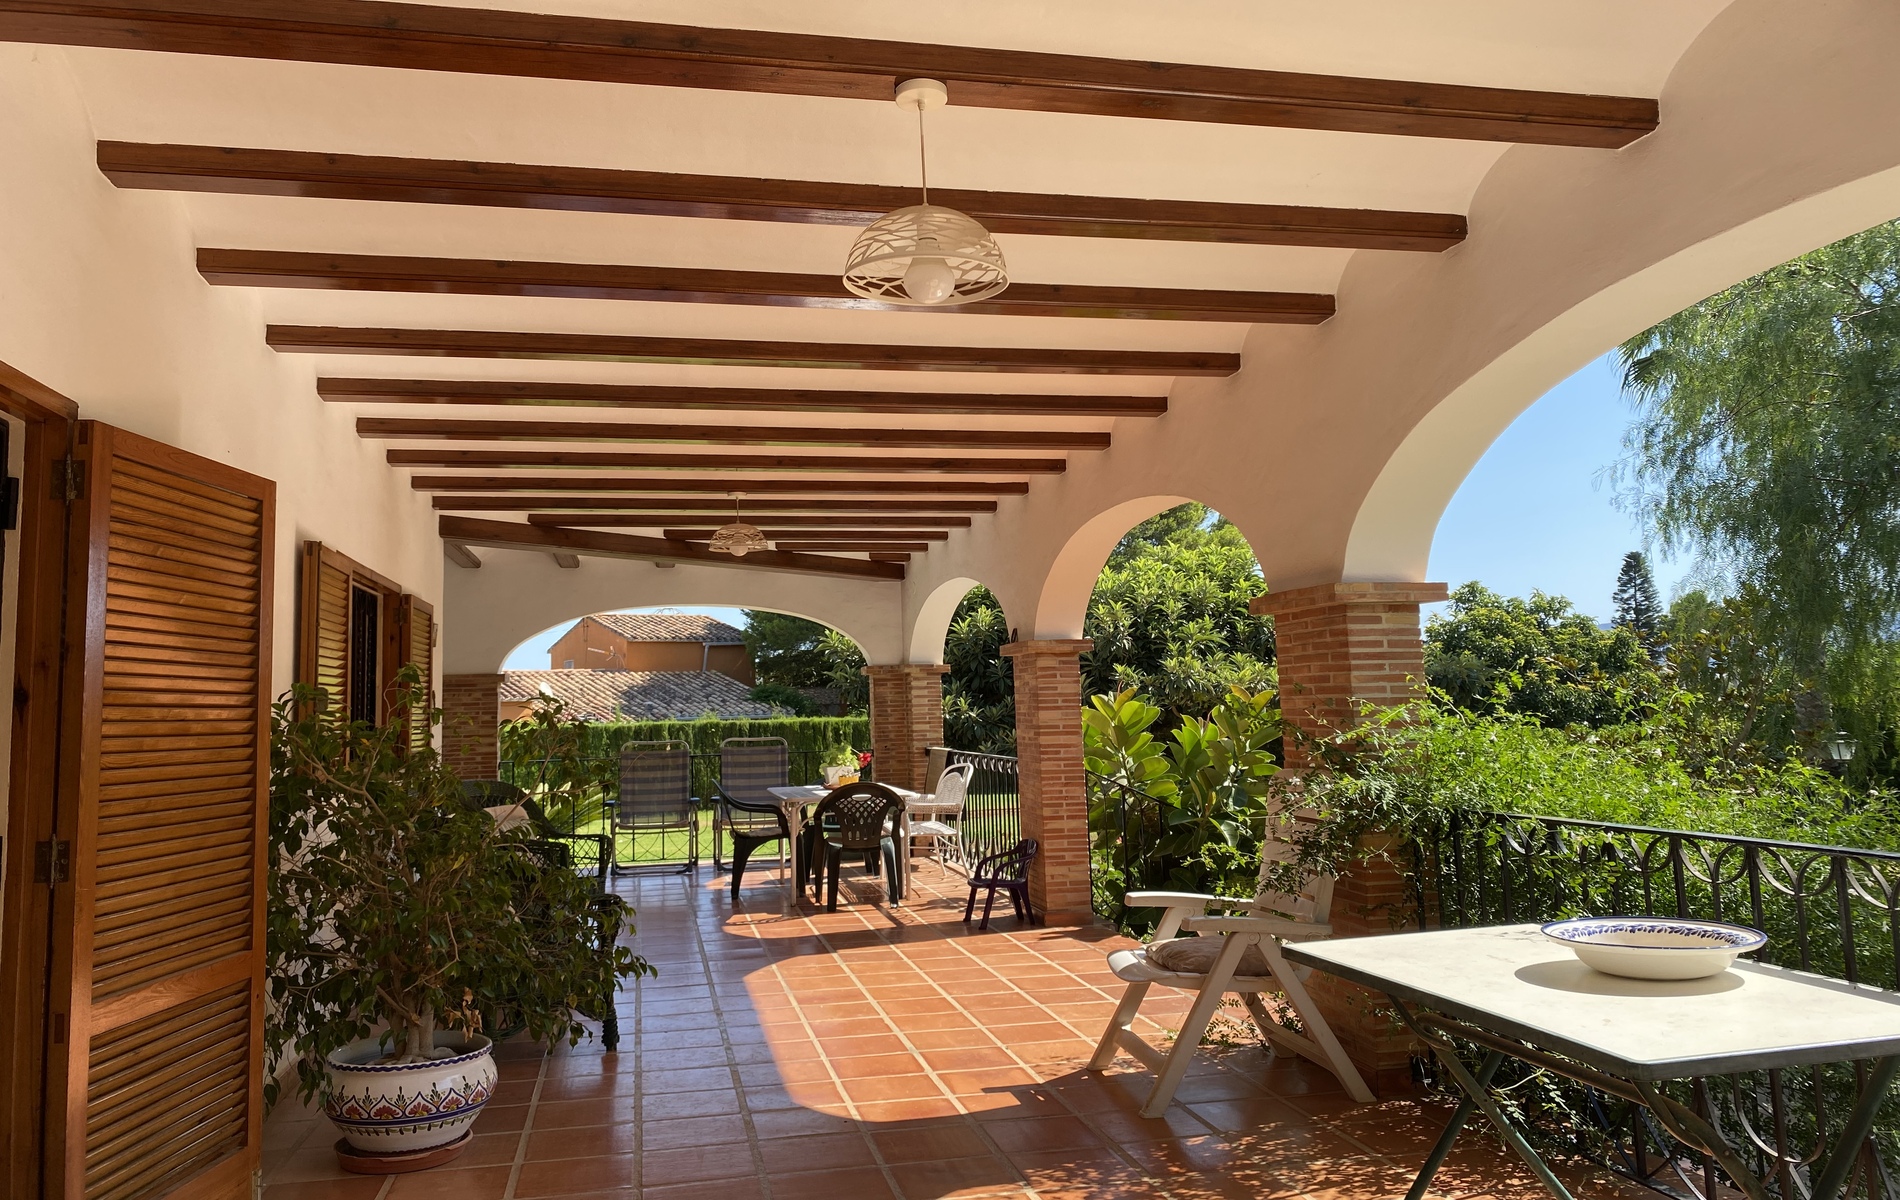 TRADITIONAL STYLE VILLA JUST 10 KM FROM DENIA